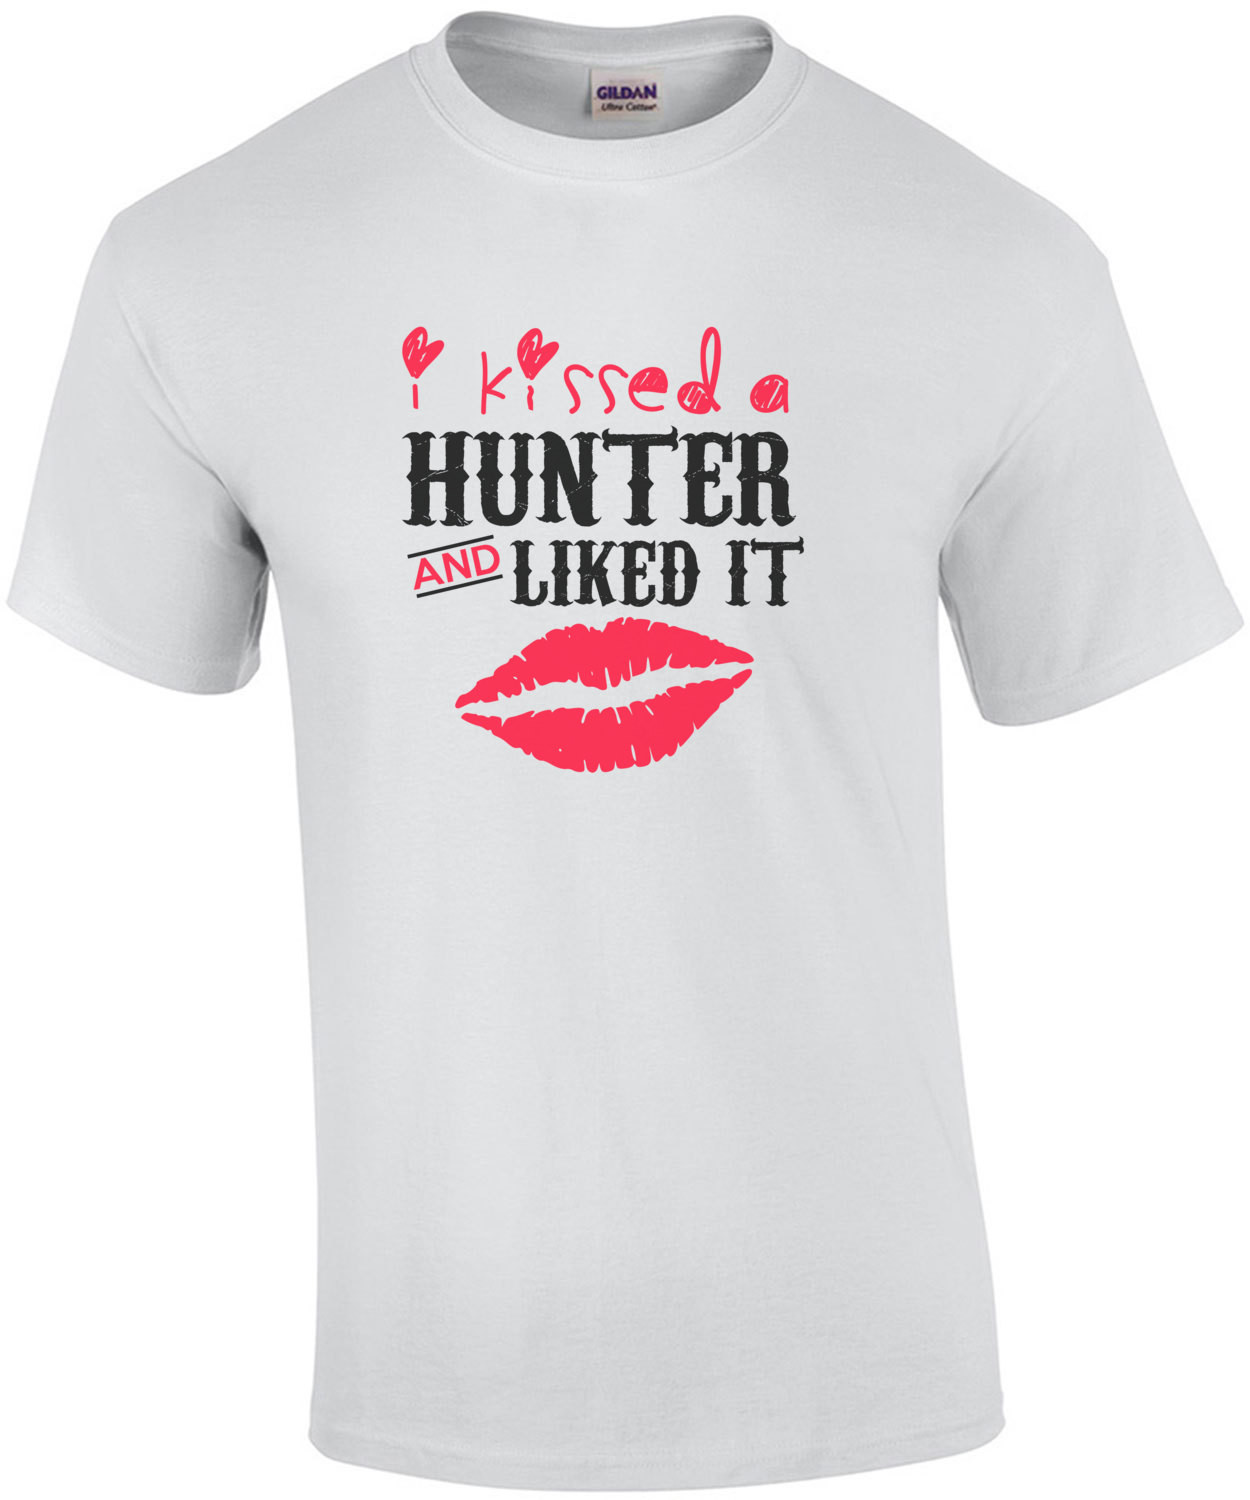 I Kissed A Hunter And Liked It T-Shirt